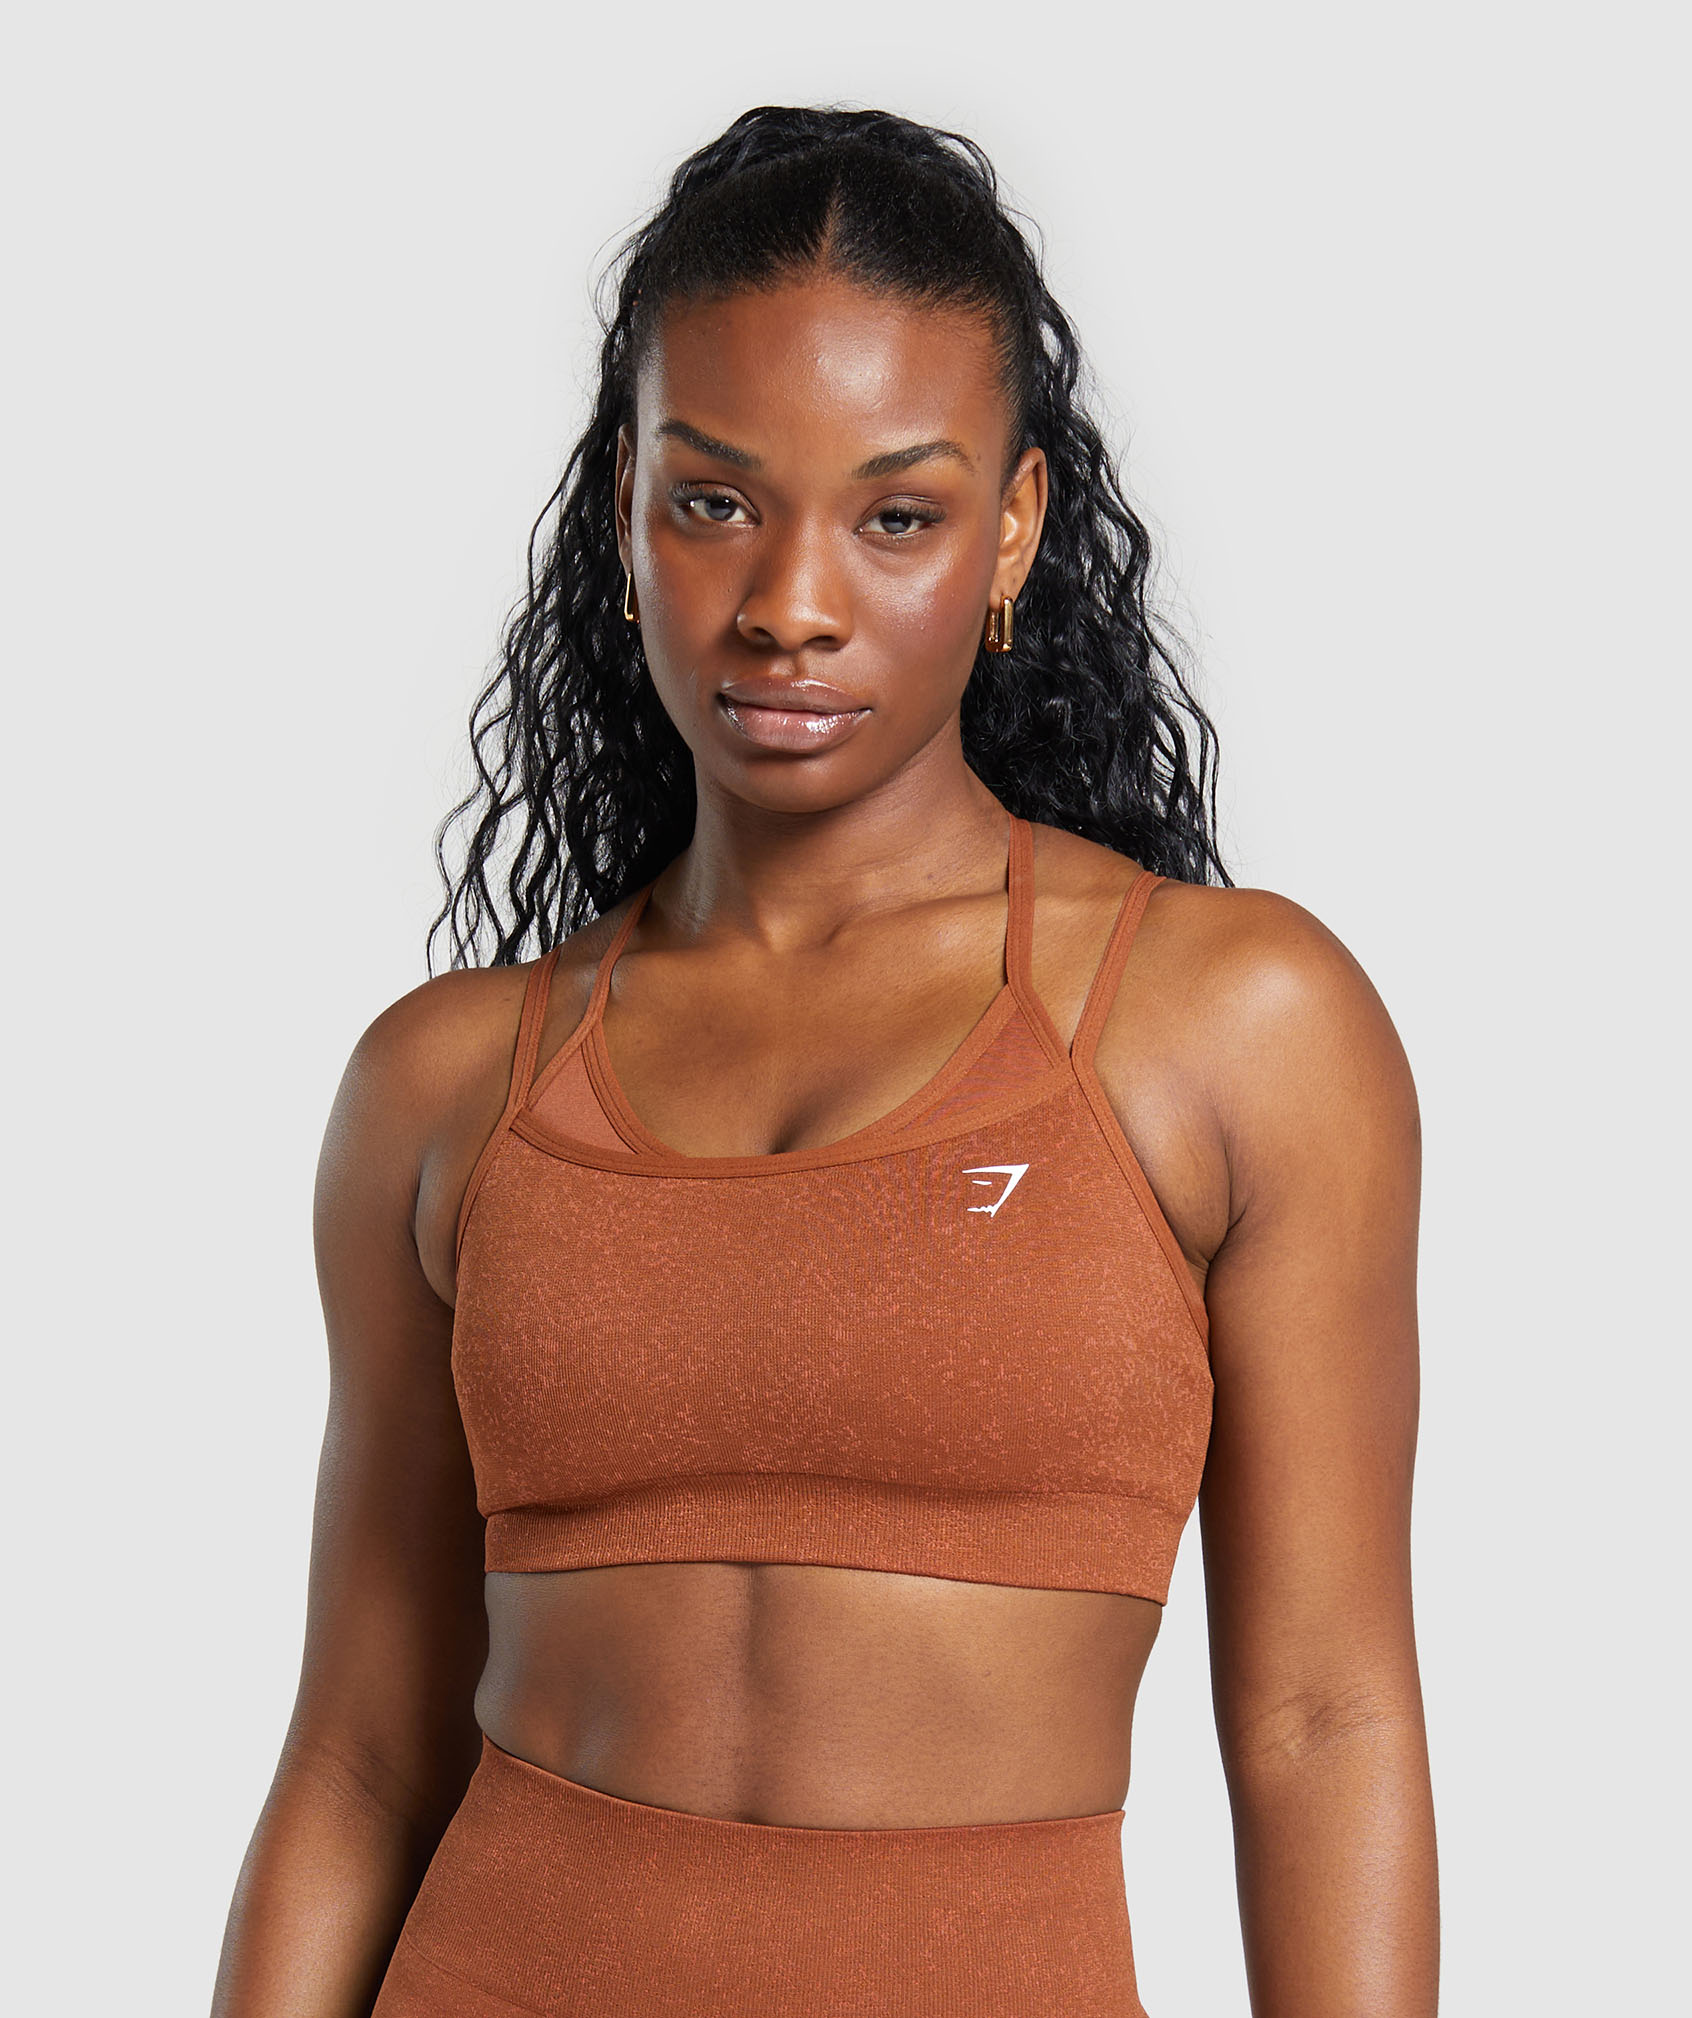 Types of Sports Bras: Choosing the Right Support for Your Workout